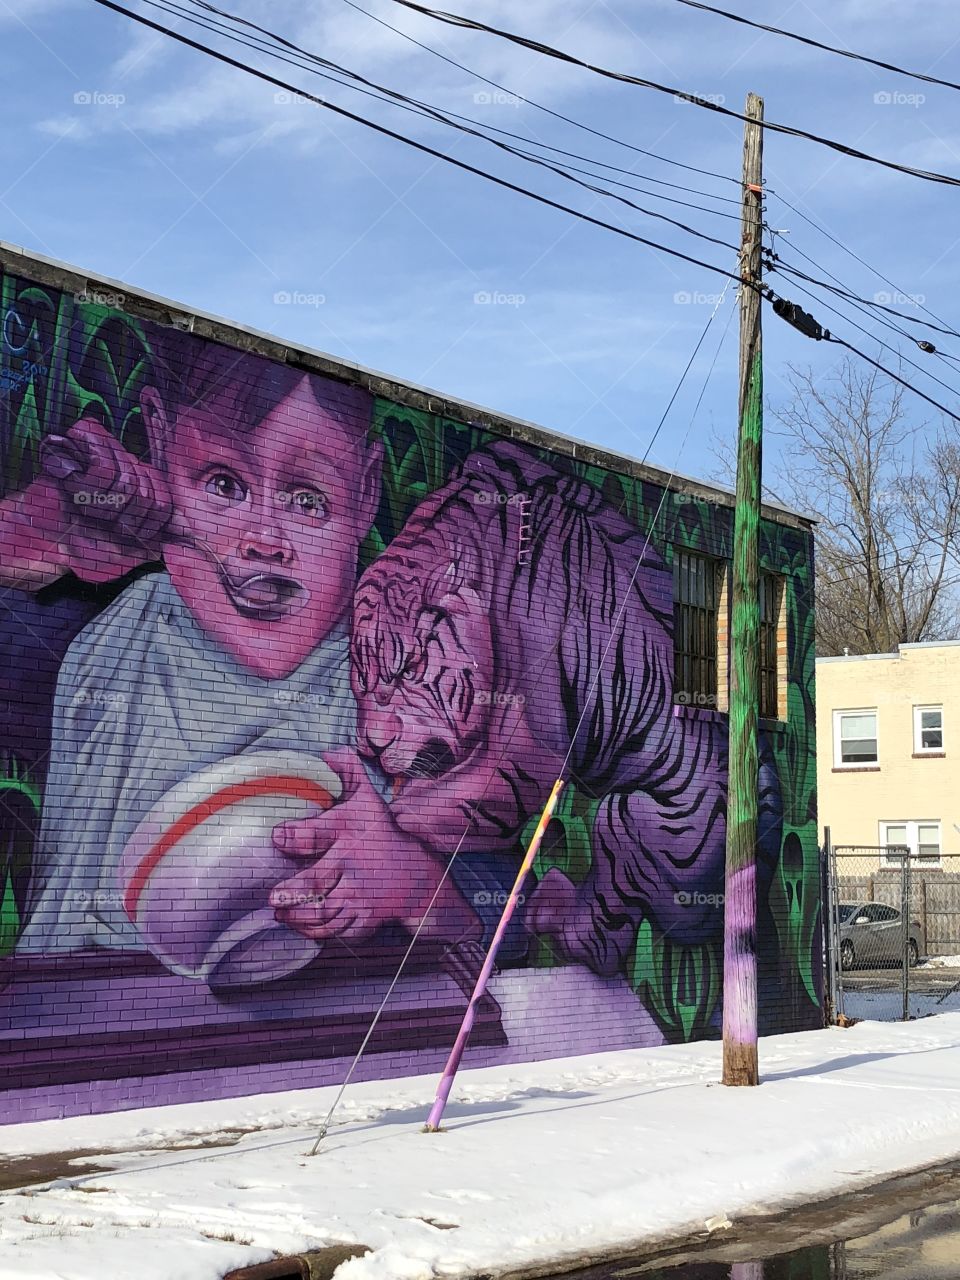 Cereal time! With a tiger. (Street art)